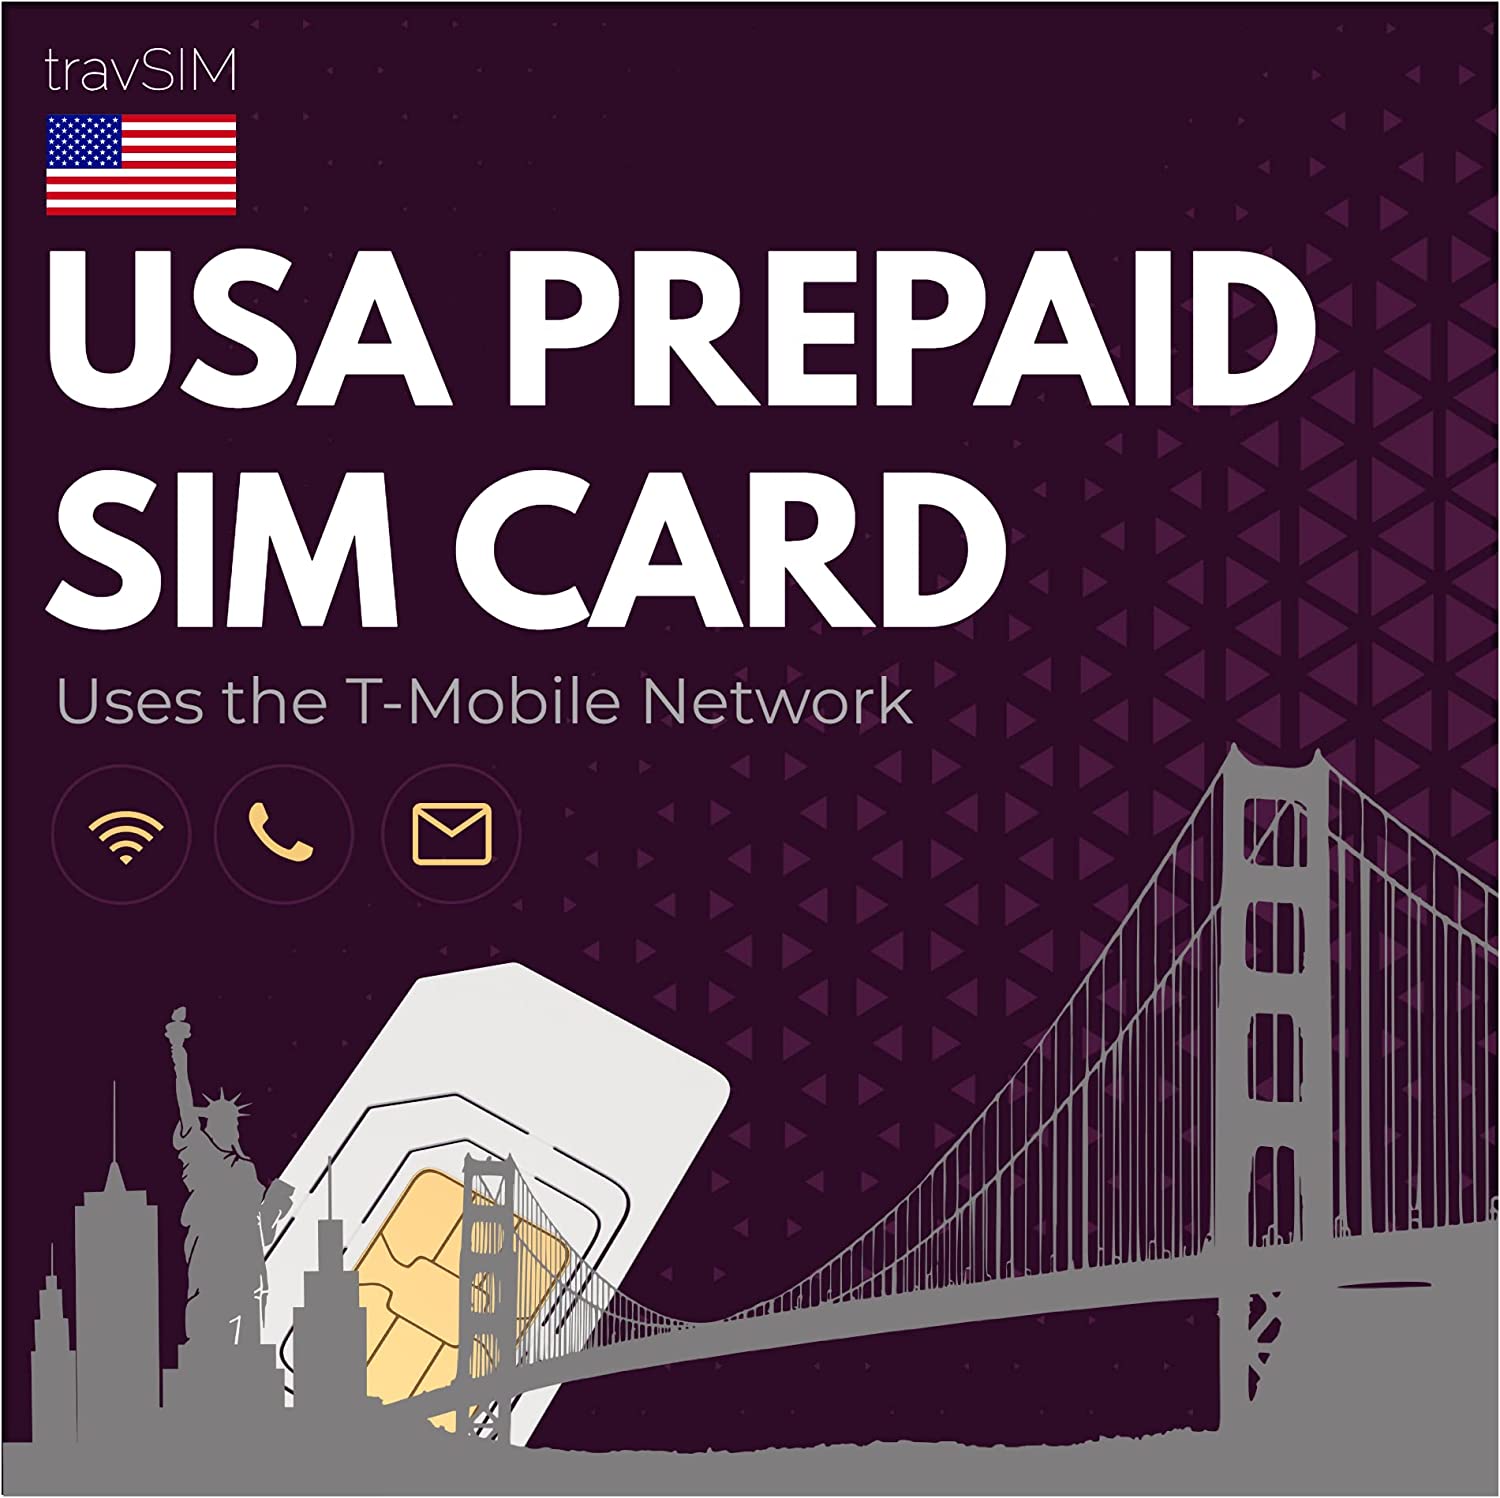  travSIM Prepaid USA SIM Card, 6GB Mobile Data with 4G/5G Speed, Unlimited Calls & Texts in The USA, Unlimited Calls to 65+ Countries